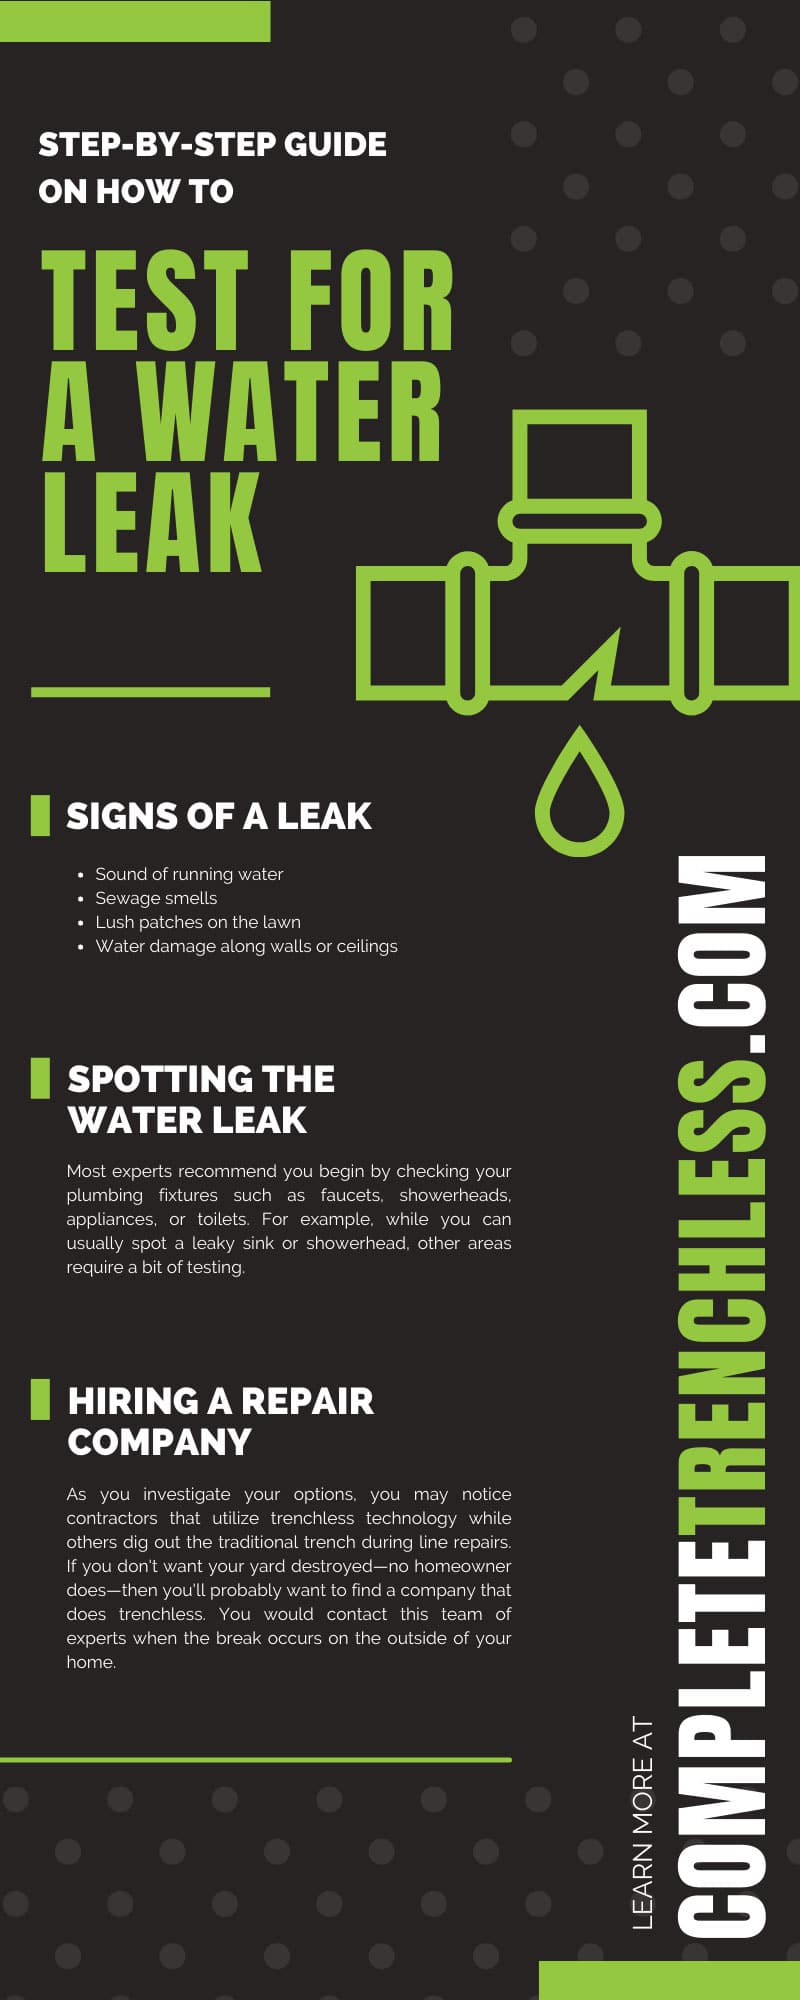 Step-by-Step Guide on How To Test for a Water Leak